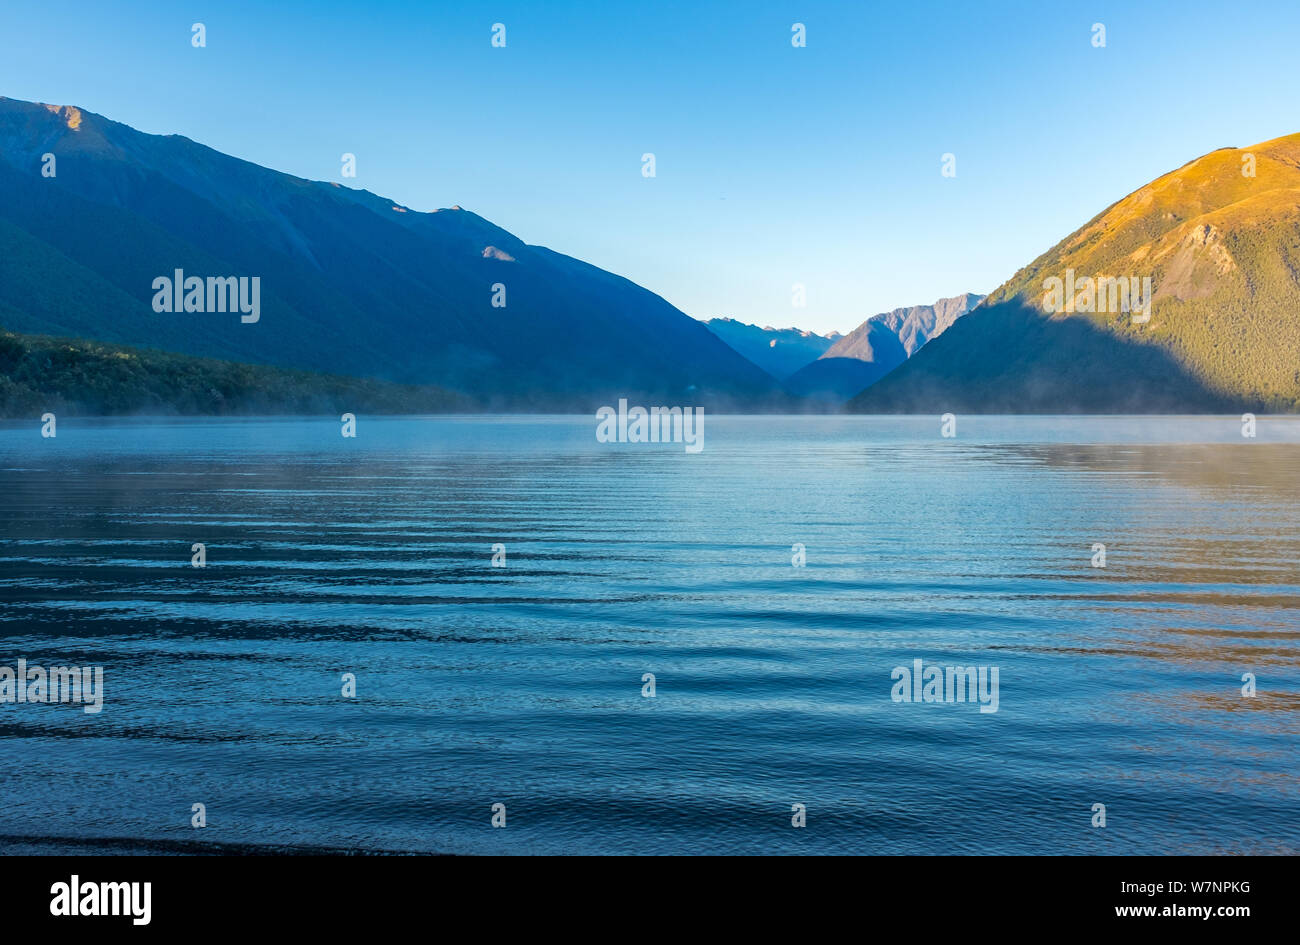 A view down the incredibly beautiful Rotoiti Lake surrounded by mountains which is part of the Nelson Lakes National Park Stock Photo